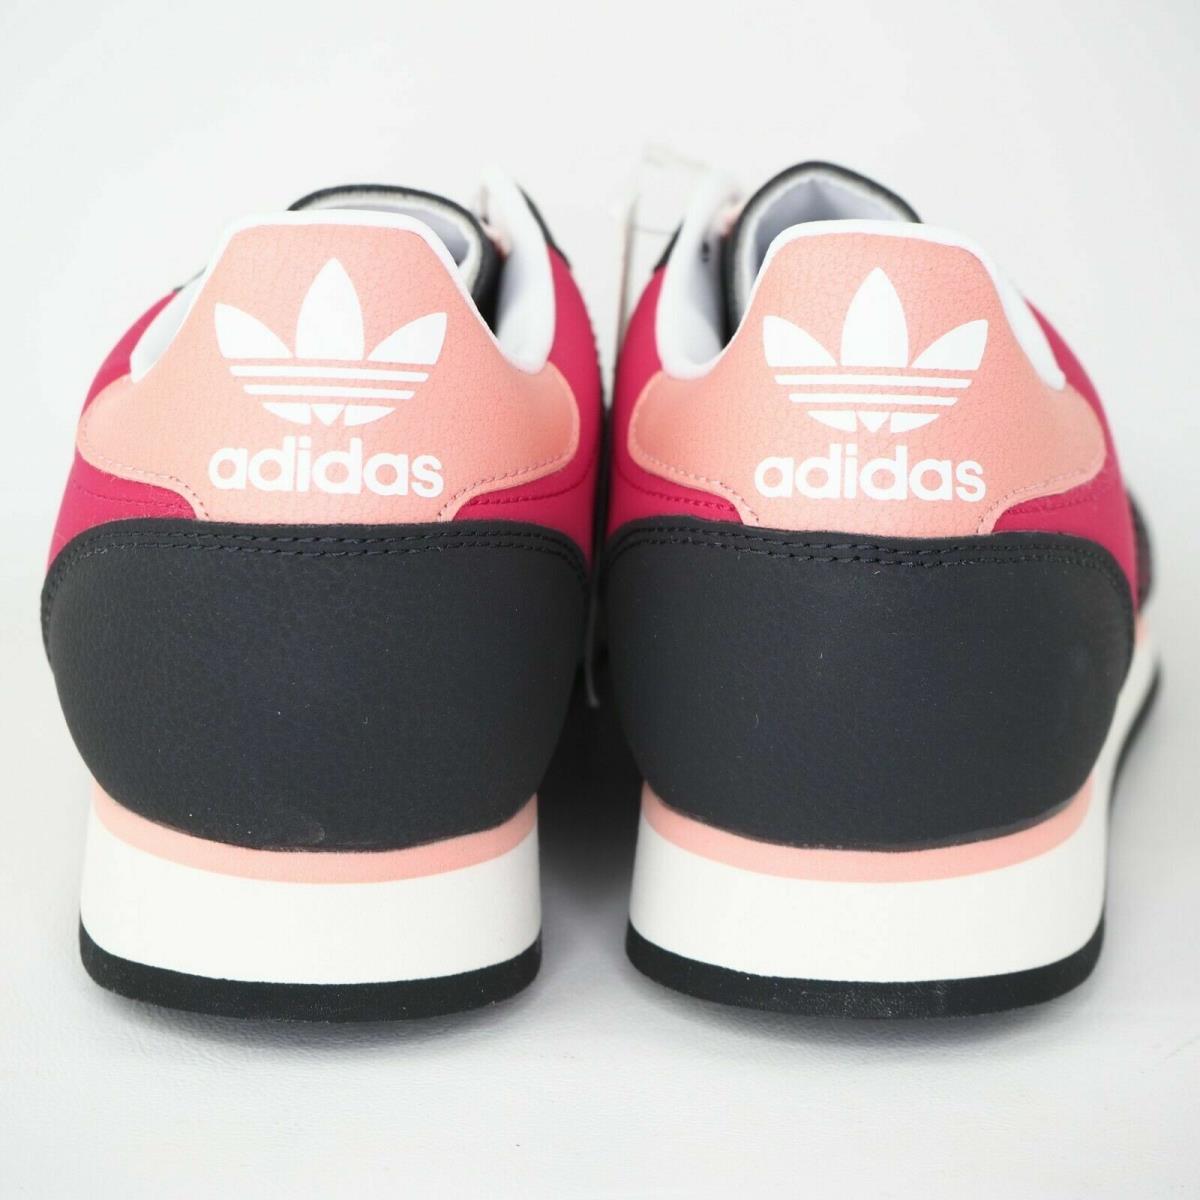 Adidas shoes Orion - Pink 3